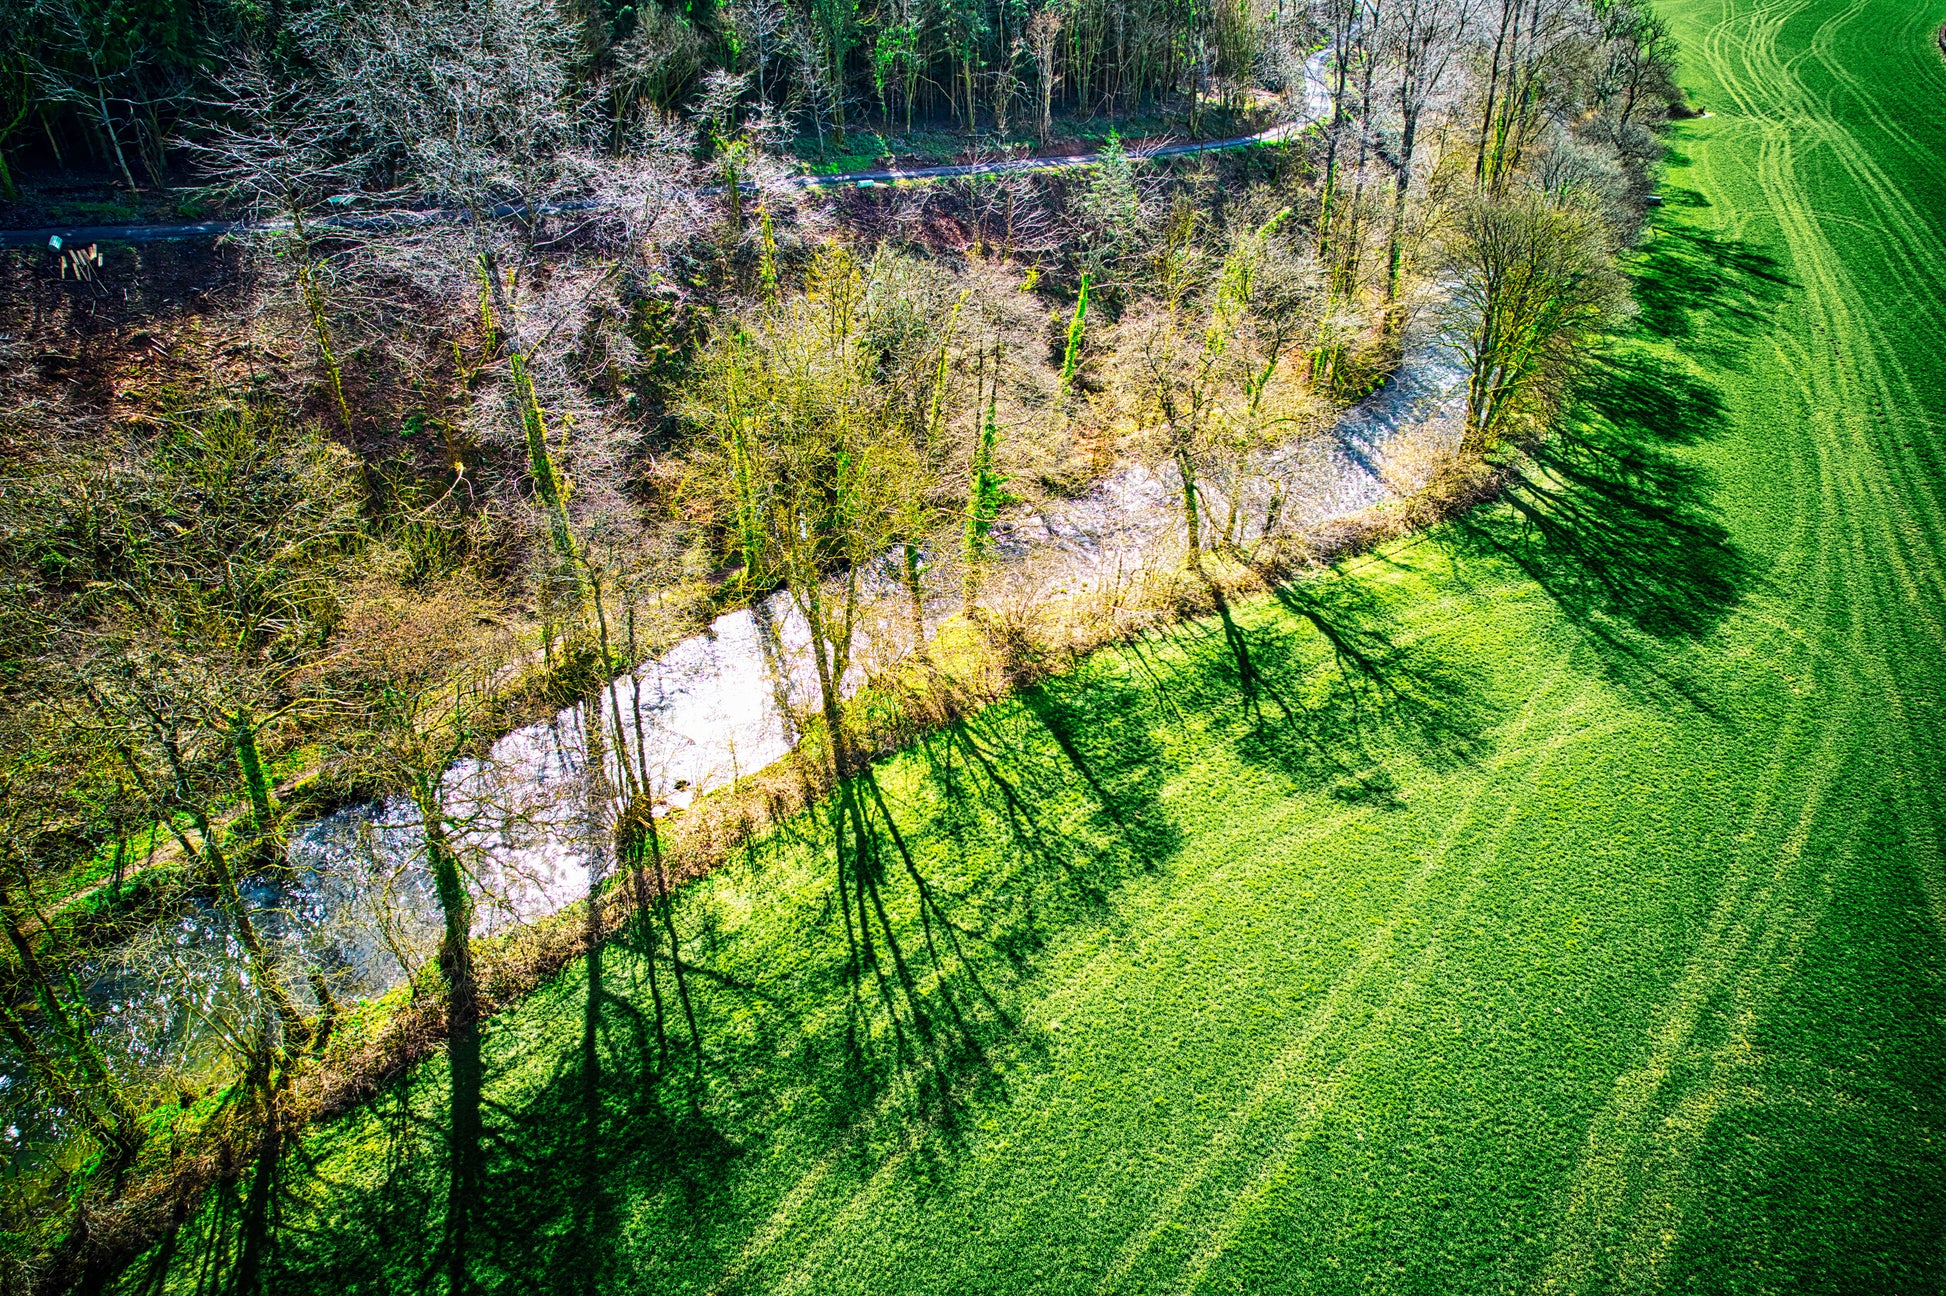 River Bray - Afternoon Shadows Photo - DJI_0145- Photographer Martin Fisher- Picture The Image